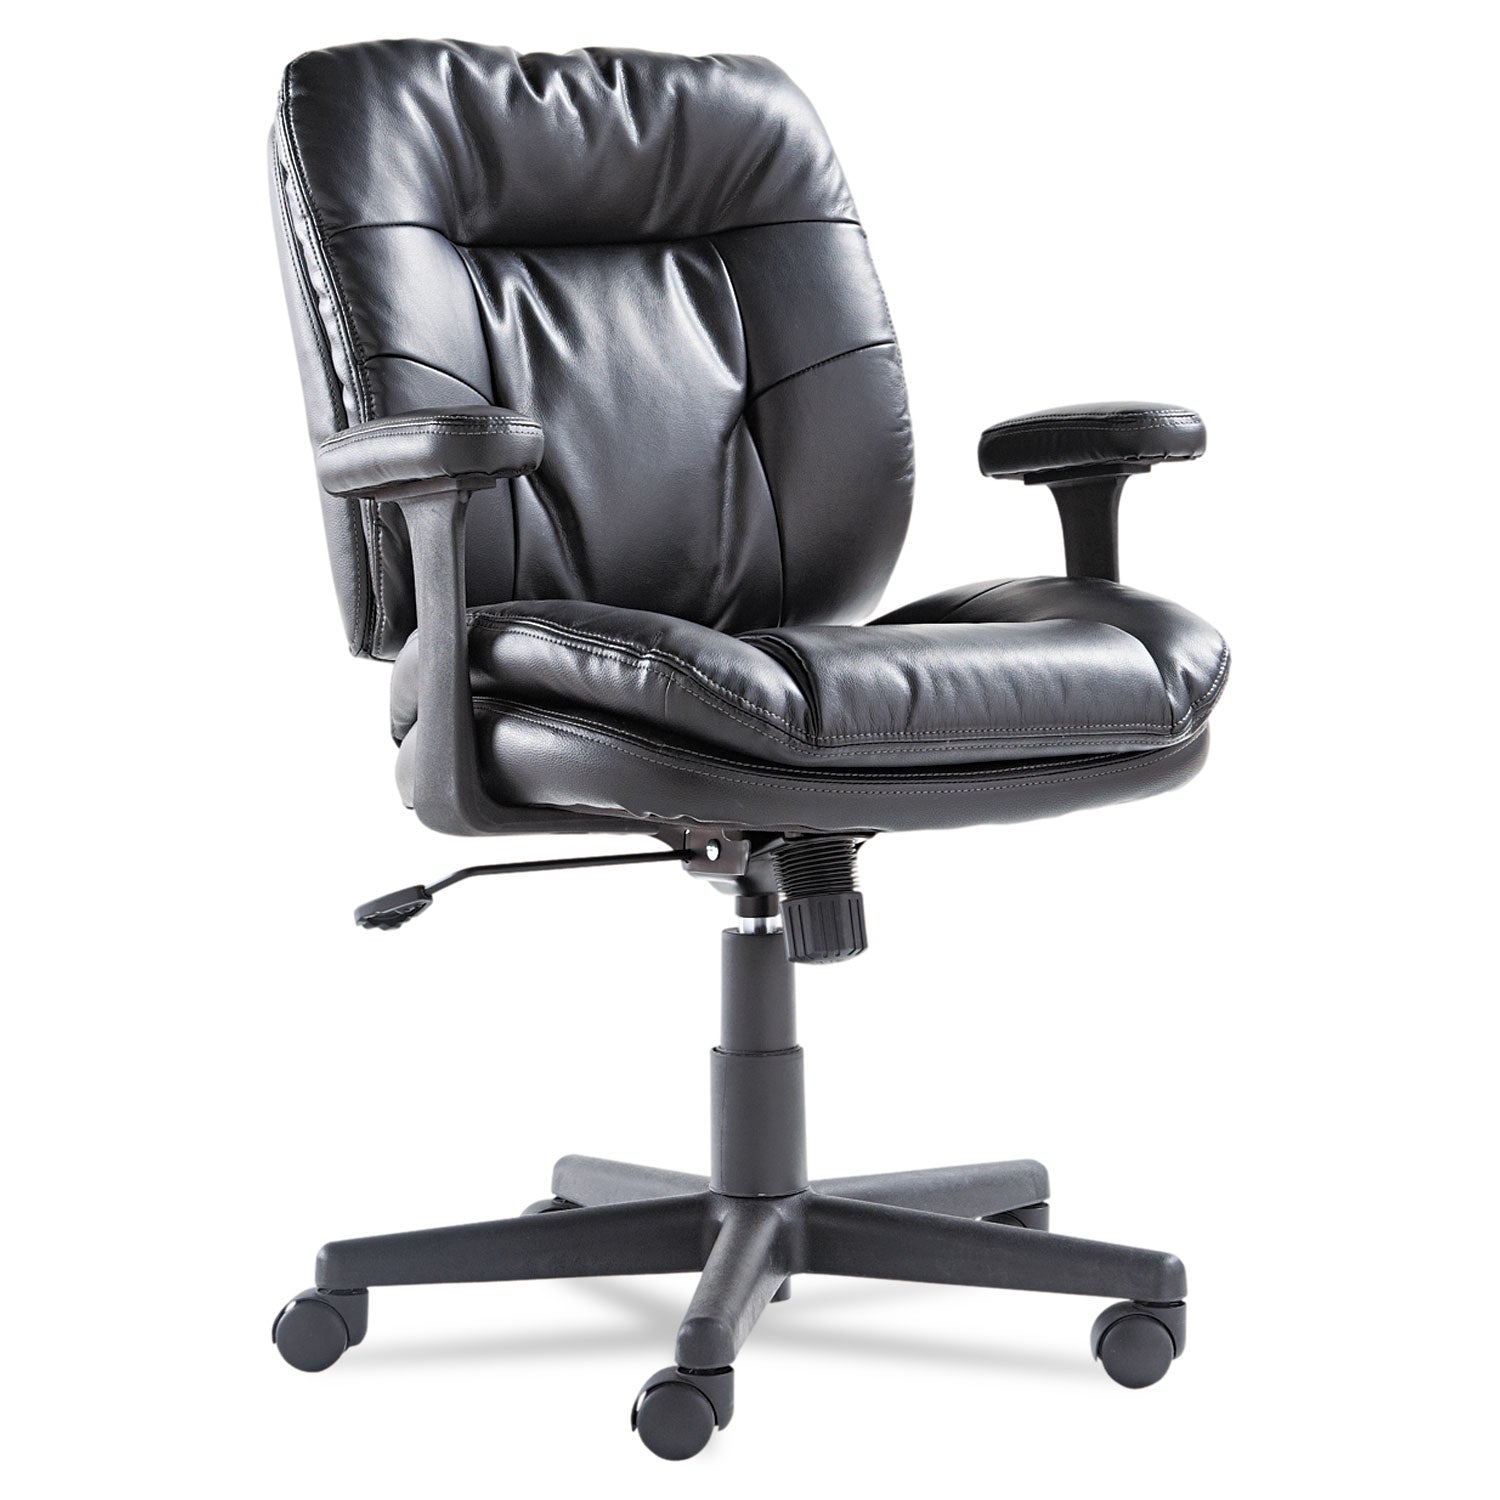 Executive Swivel/Tilt Chair, Supports Up to 250 lb, 16.93" to 20.67" Seat Height, Black - 